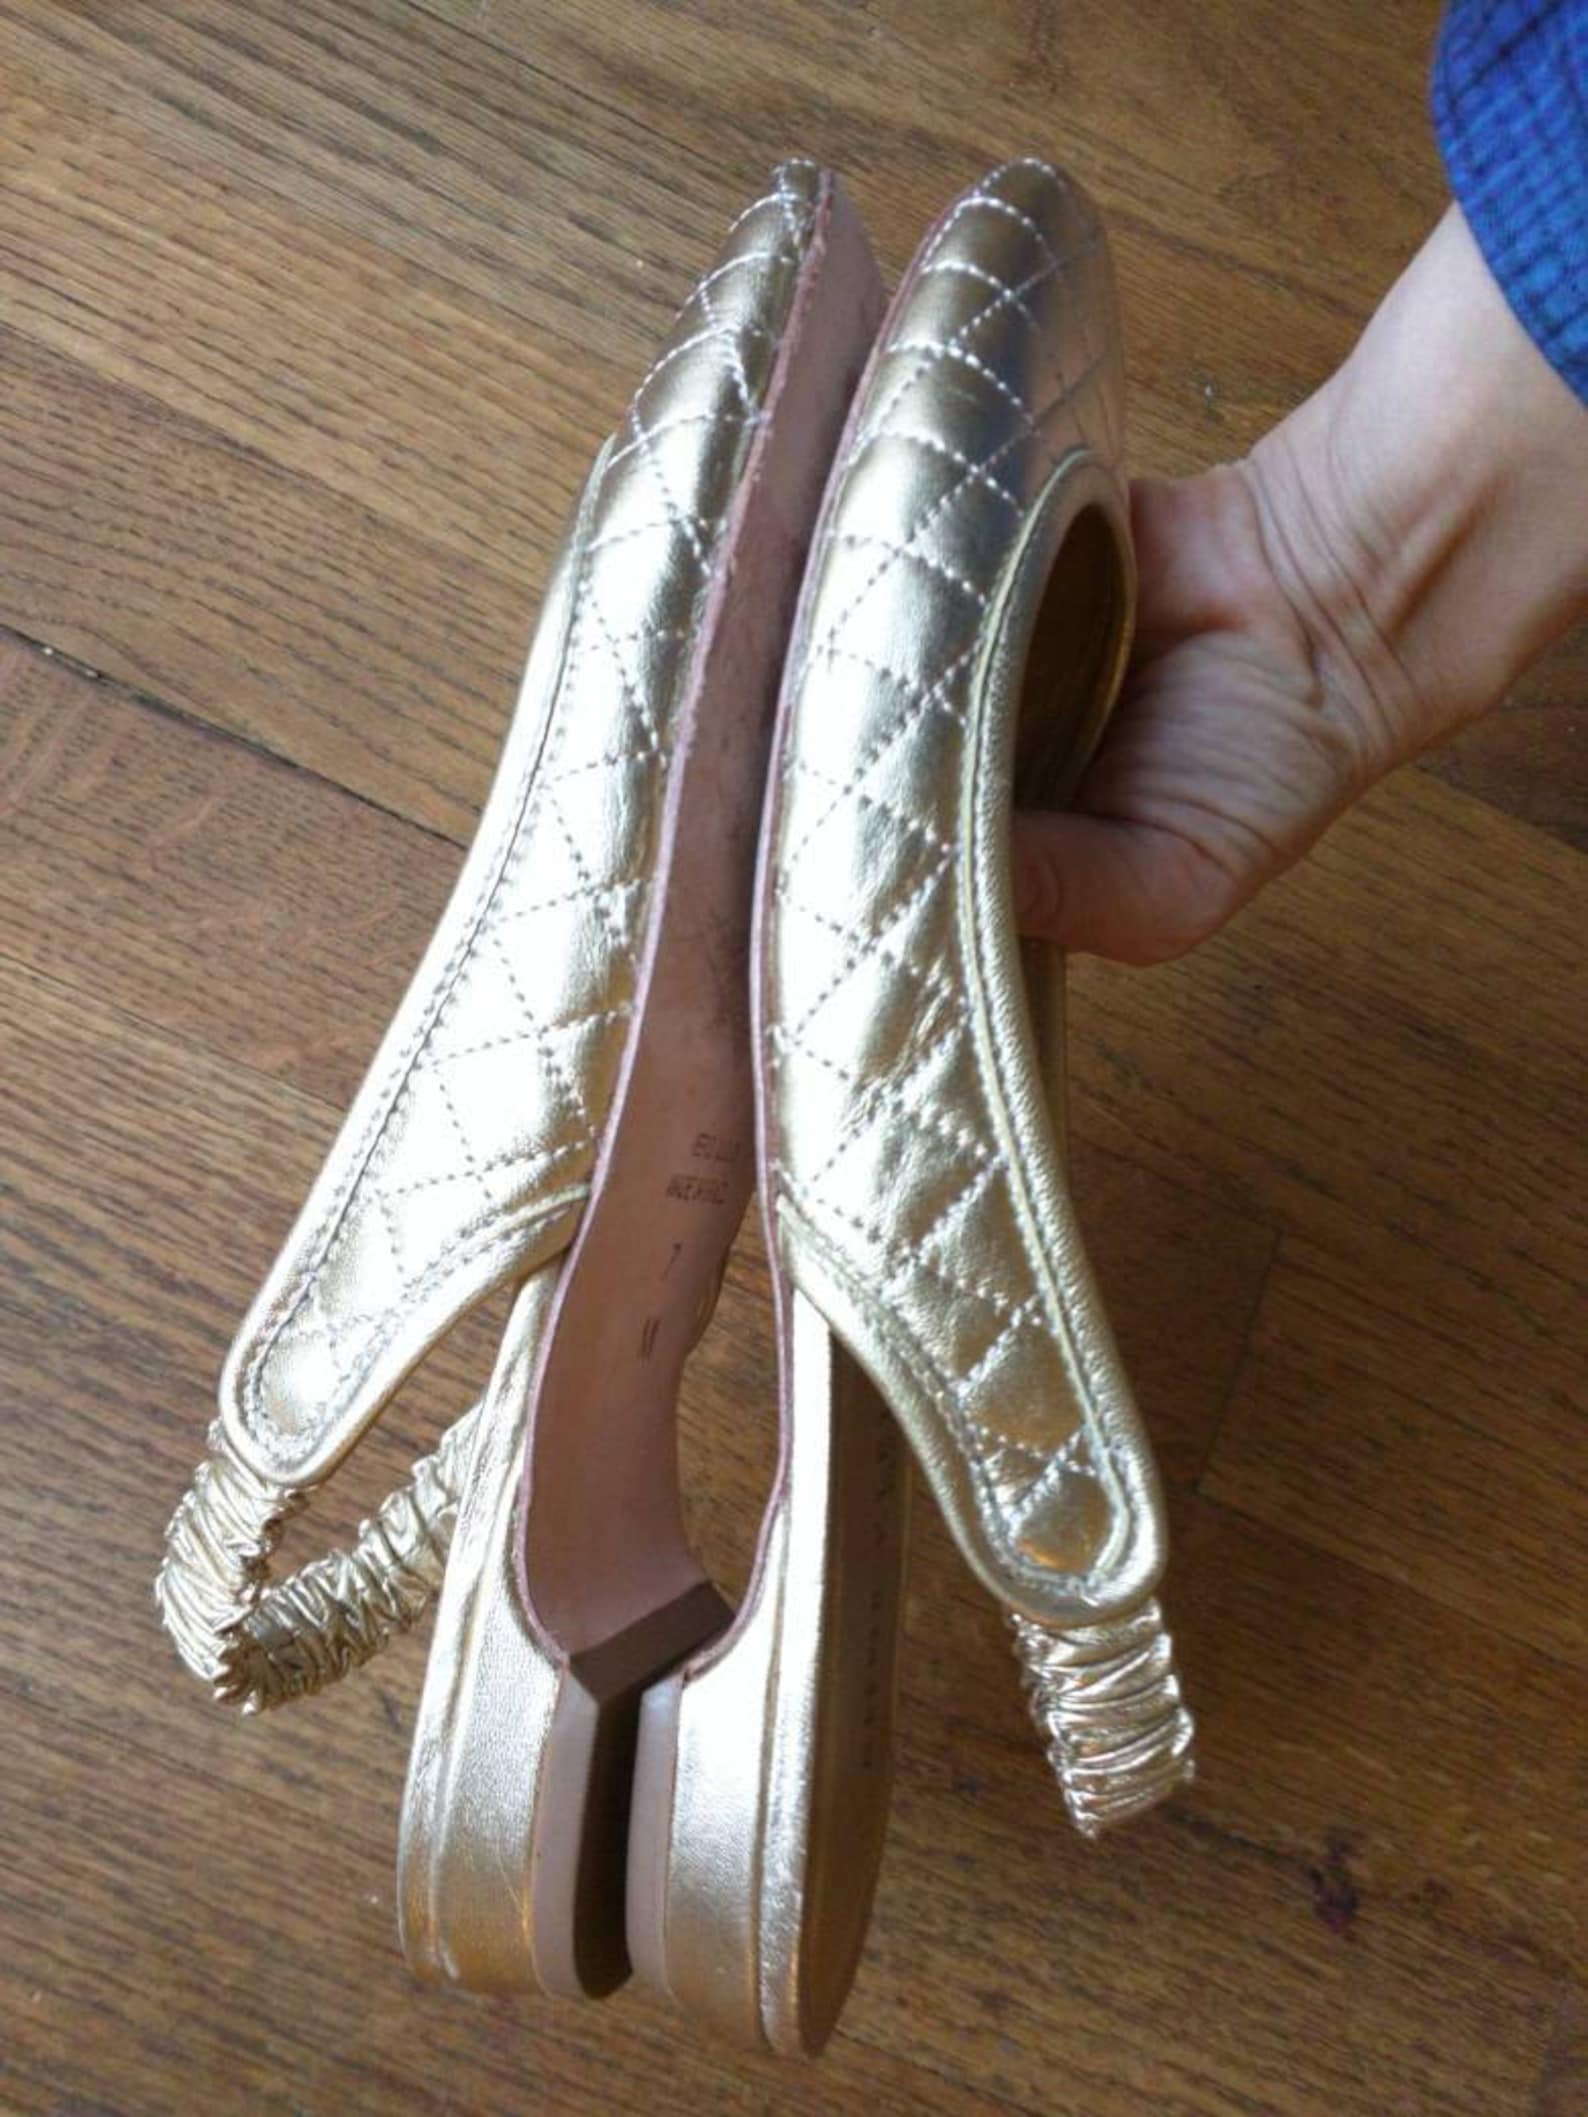 anne klein quilted leather gold ballet flats size 7 preppie nineties classic sling back